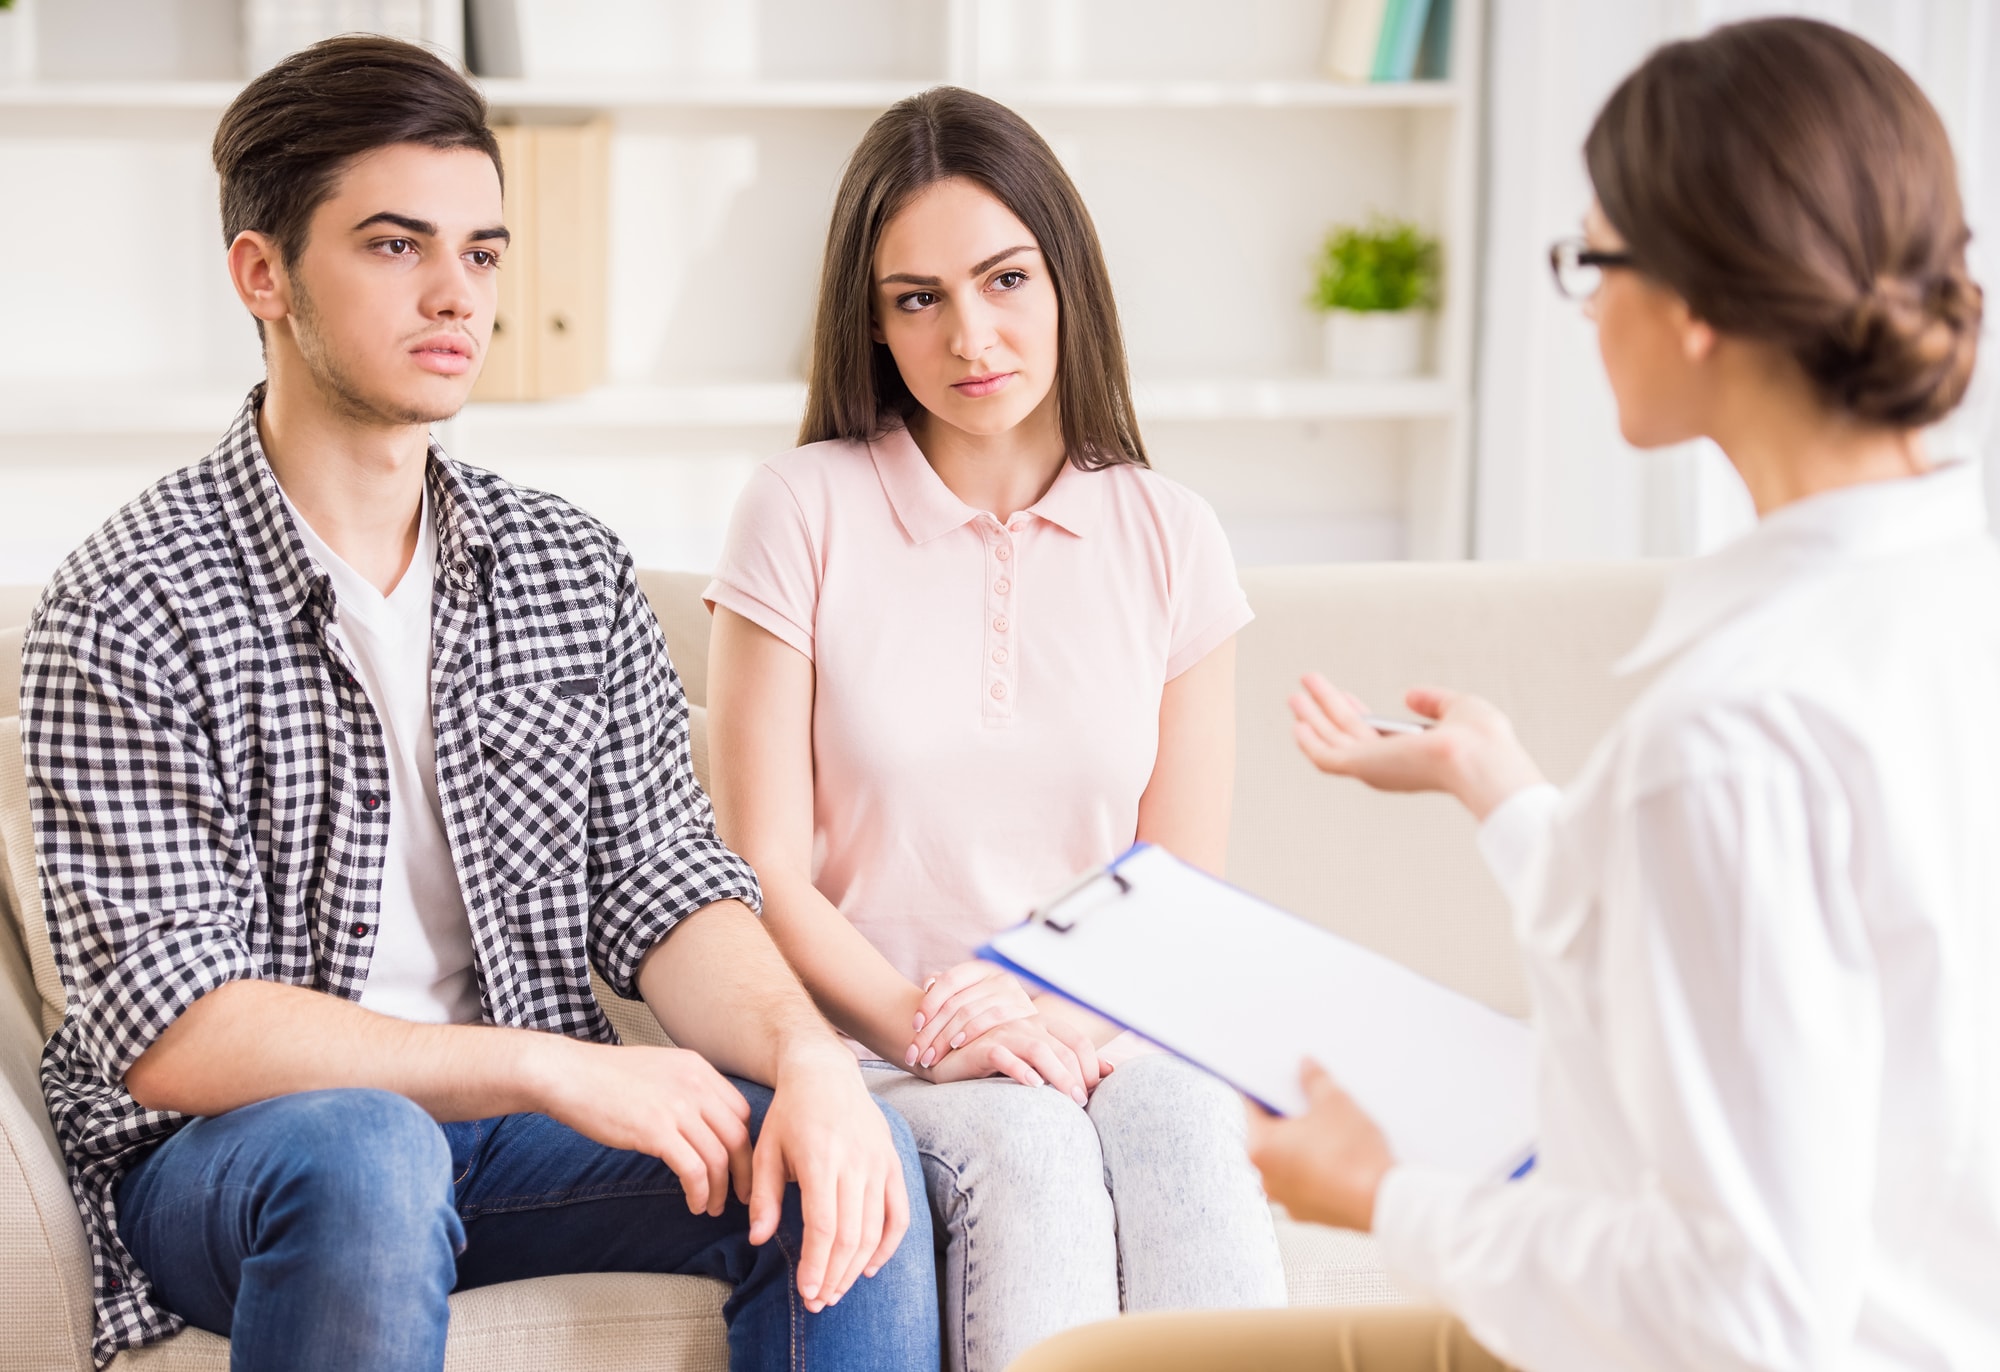 Does Marriage Counseling Work? The image depicts a young couple in a marriage counseling session. The male participant, dressed in a plaid shirt and jeans, appears somewhat concerned or skeptical, sitting with his arms and legs crossed.